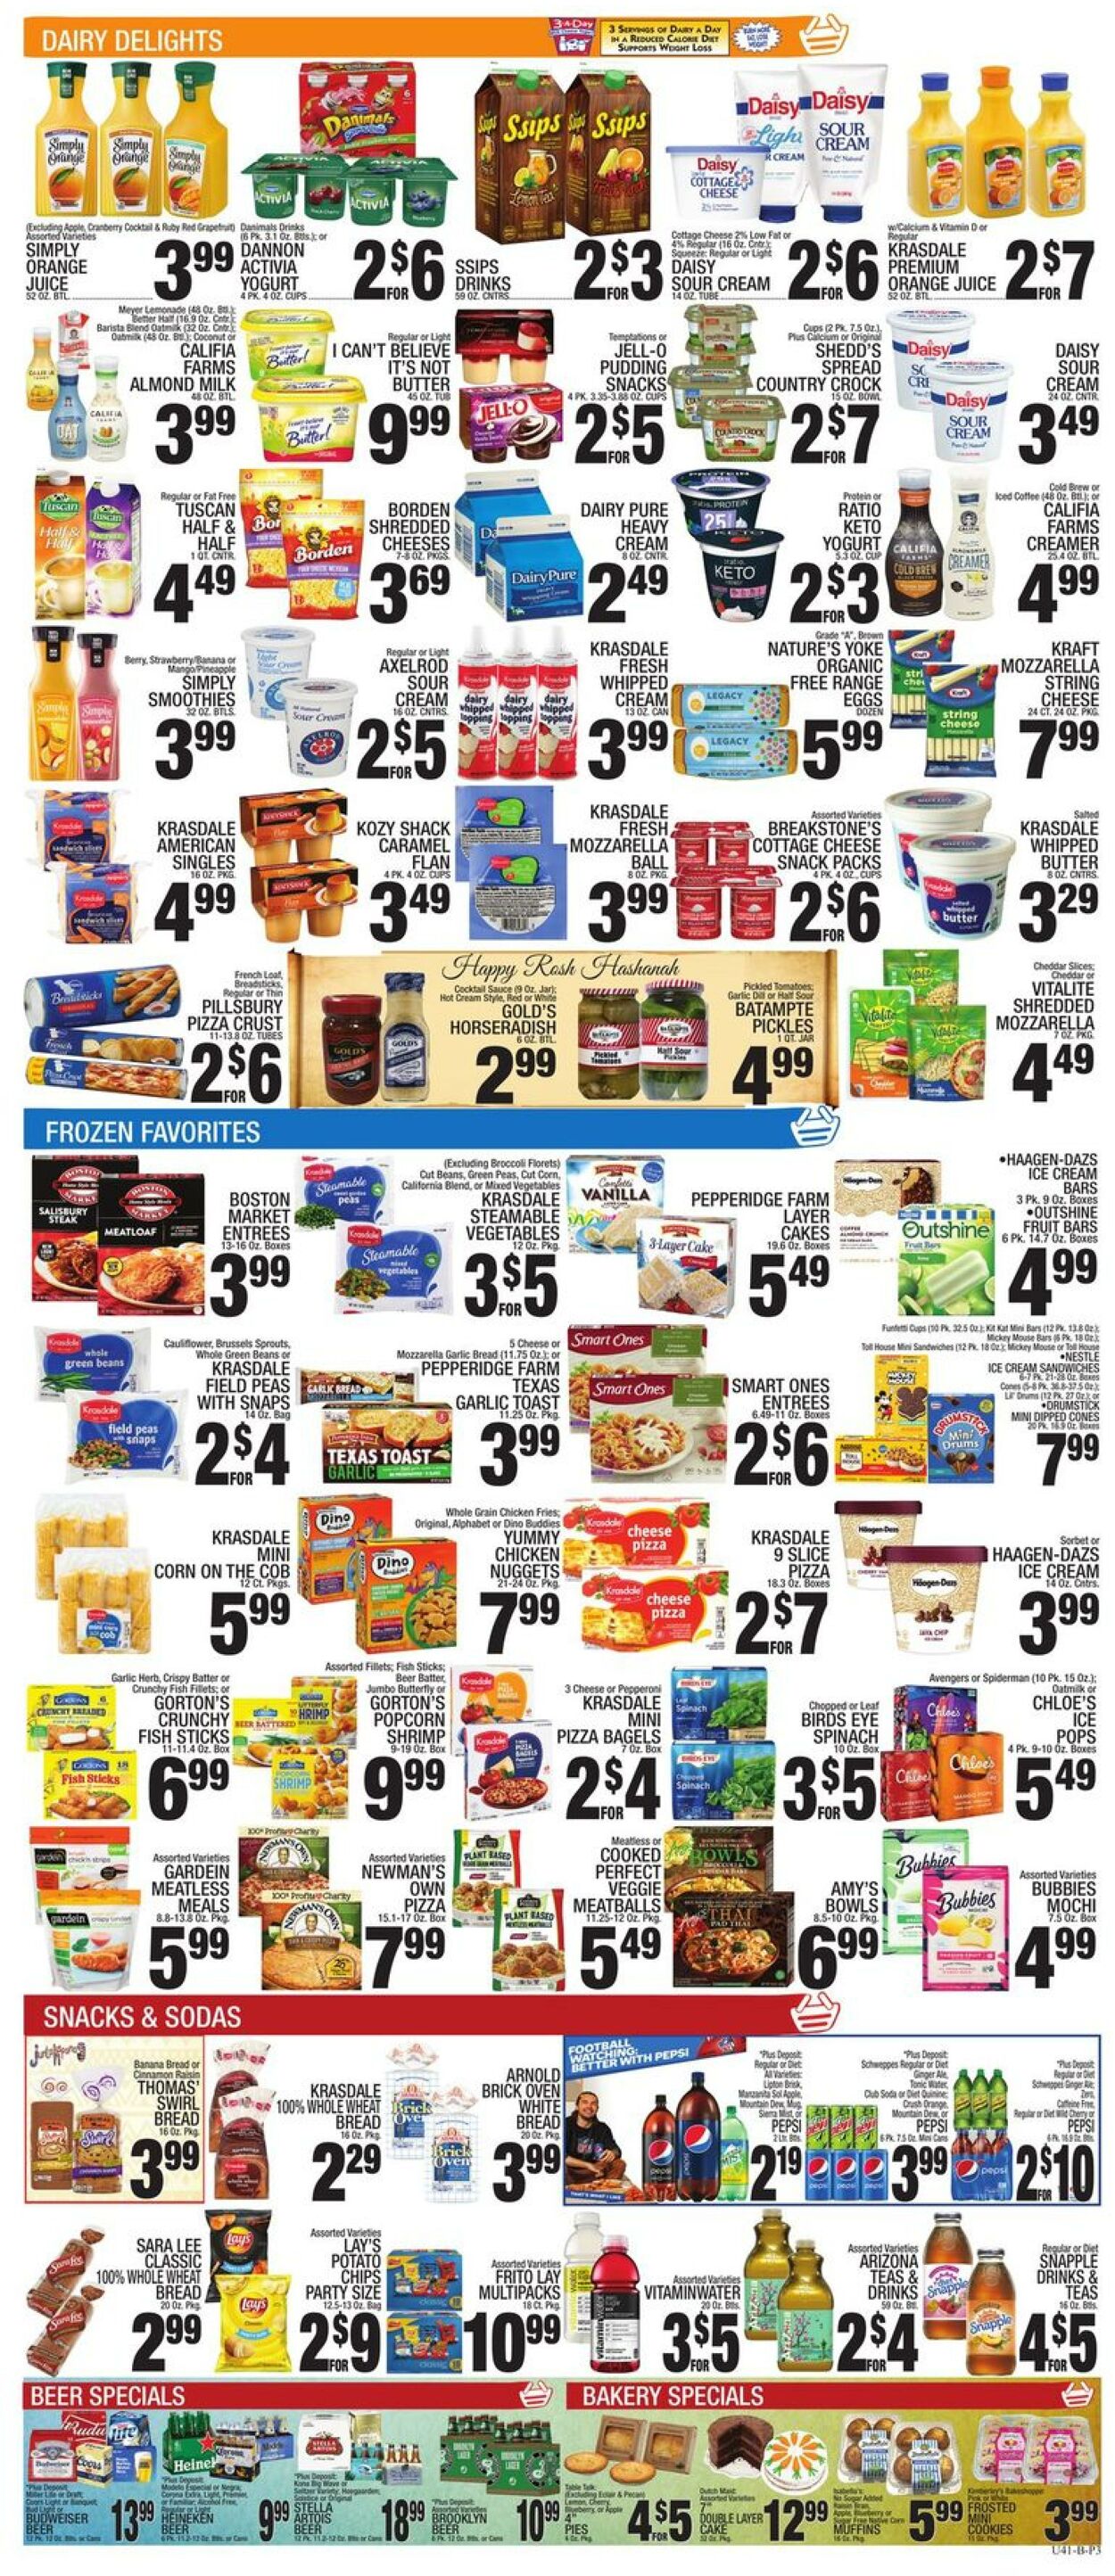 Weekly ad CTown 09/23/2022 - 09/29/2022